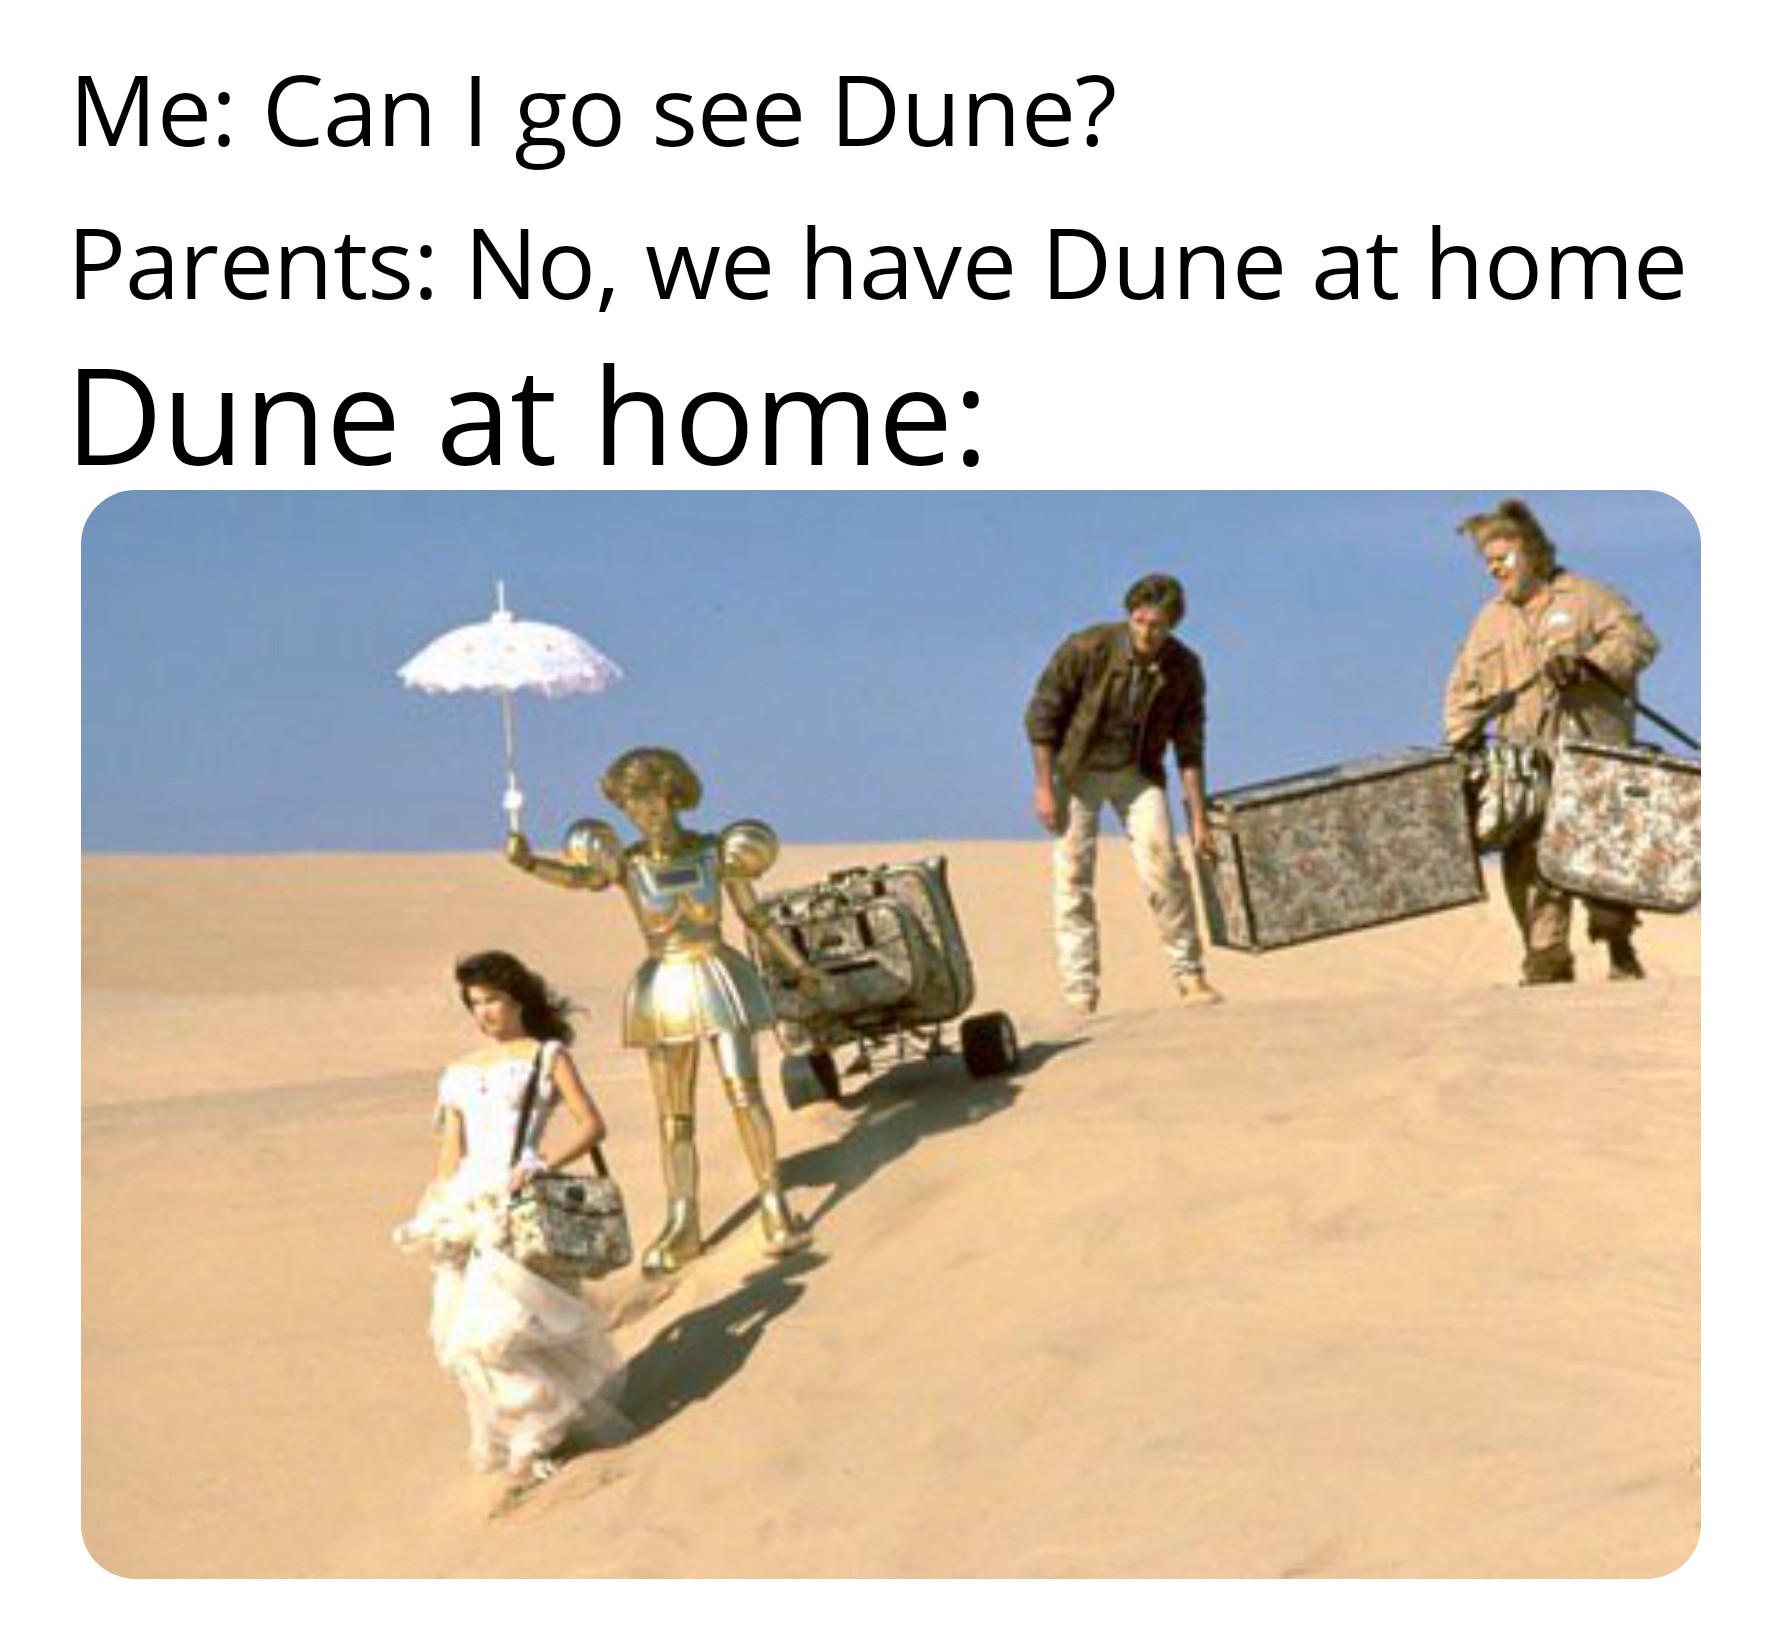 spaceballs desert luggage - Me Can I go see Dune? Parents No, we have Dune at home Dune at home